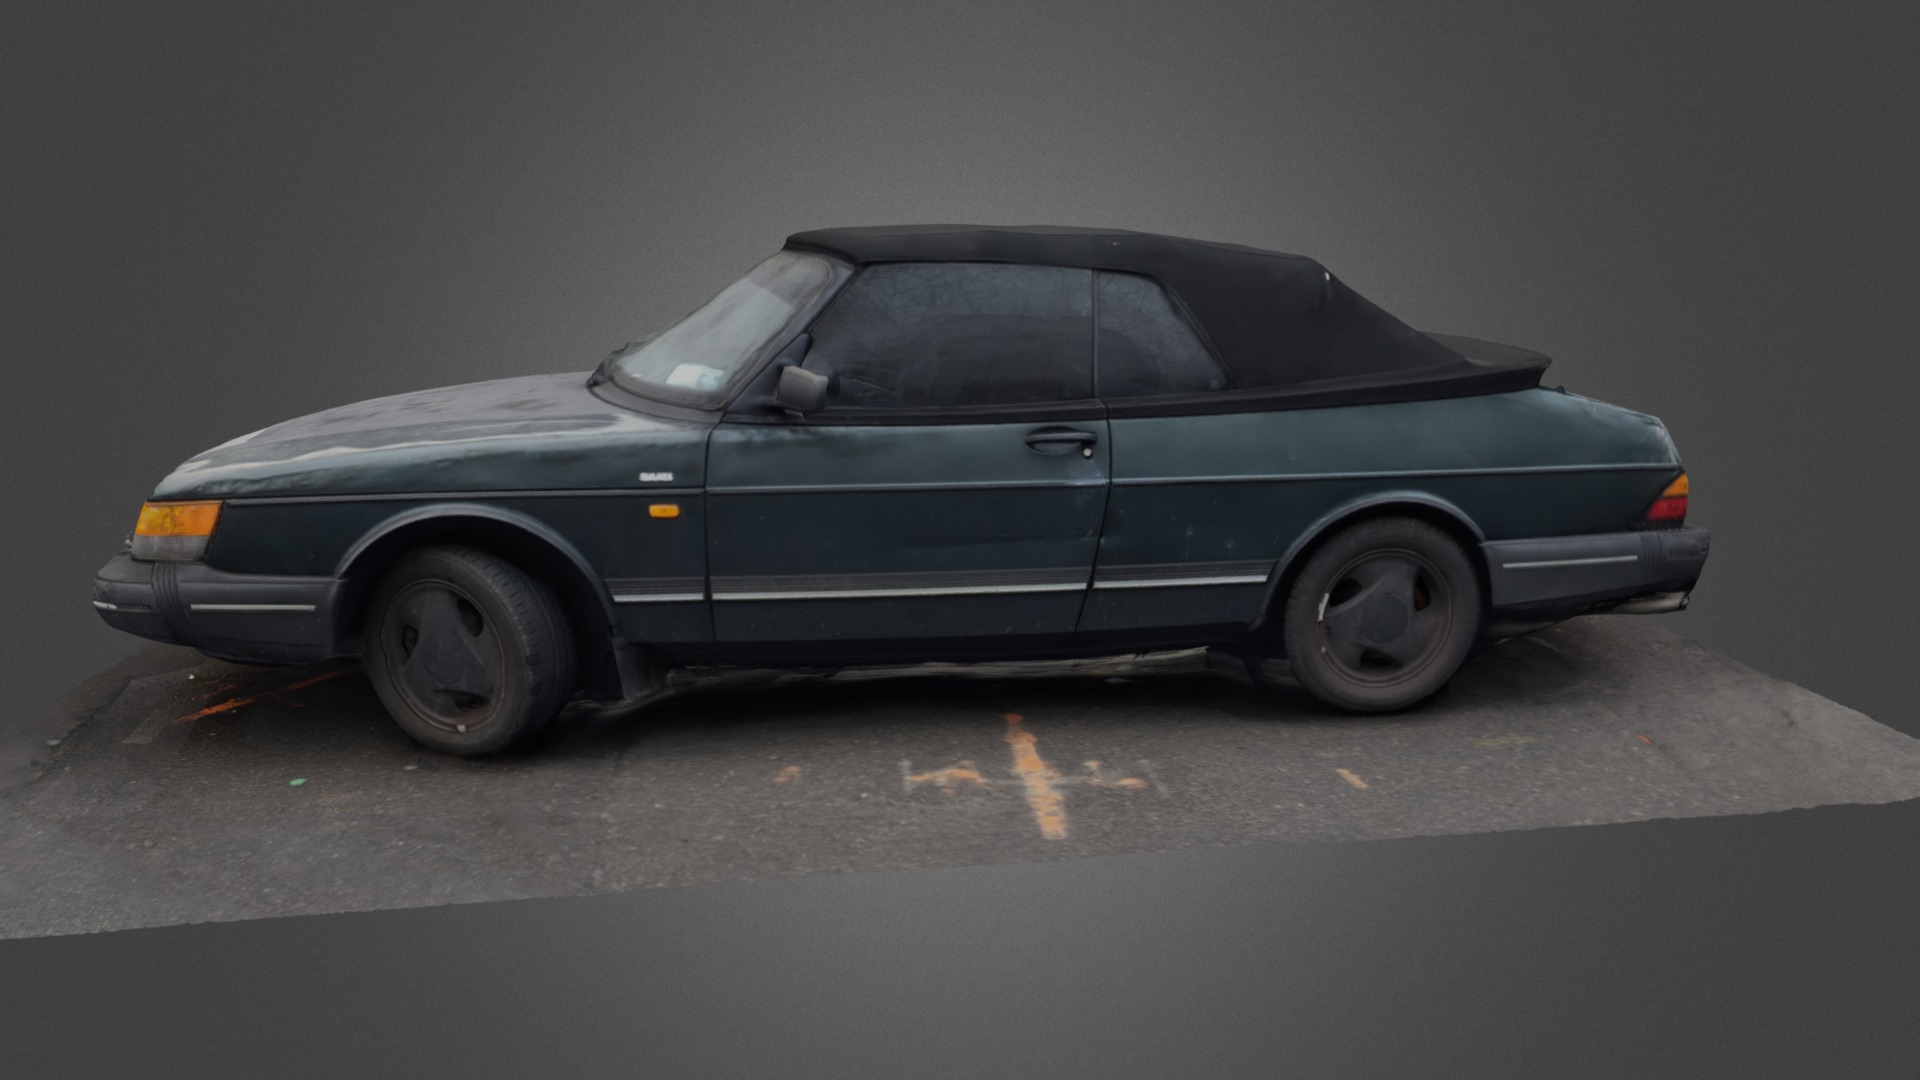 3D model SAAB 900 S - This is a 3D model of the SAAB 900 S. The 3D model is about a car parked on pavement.